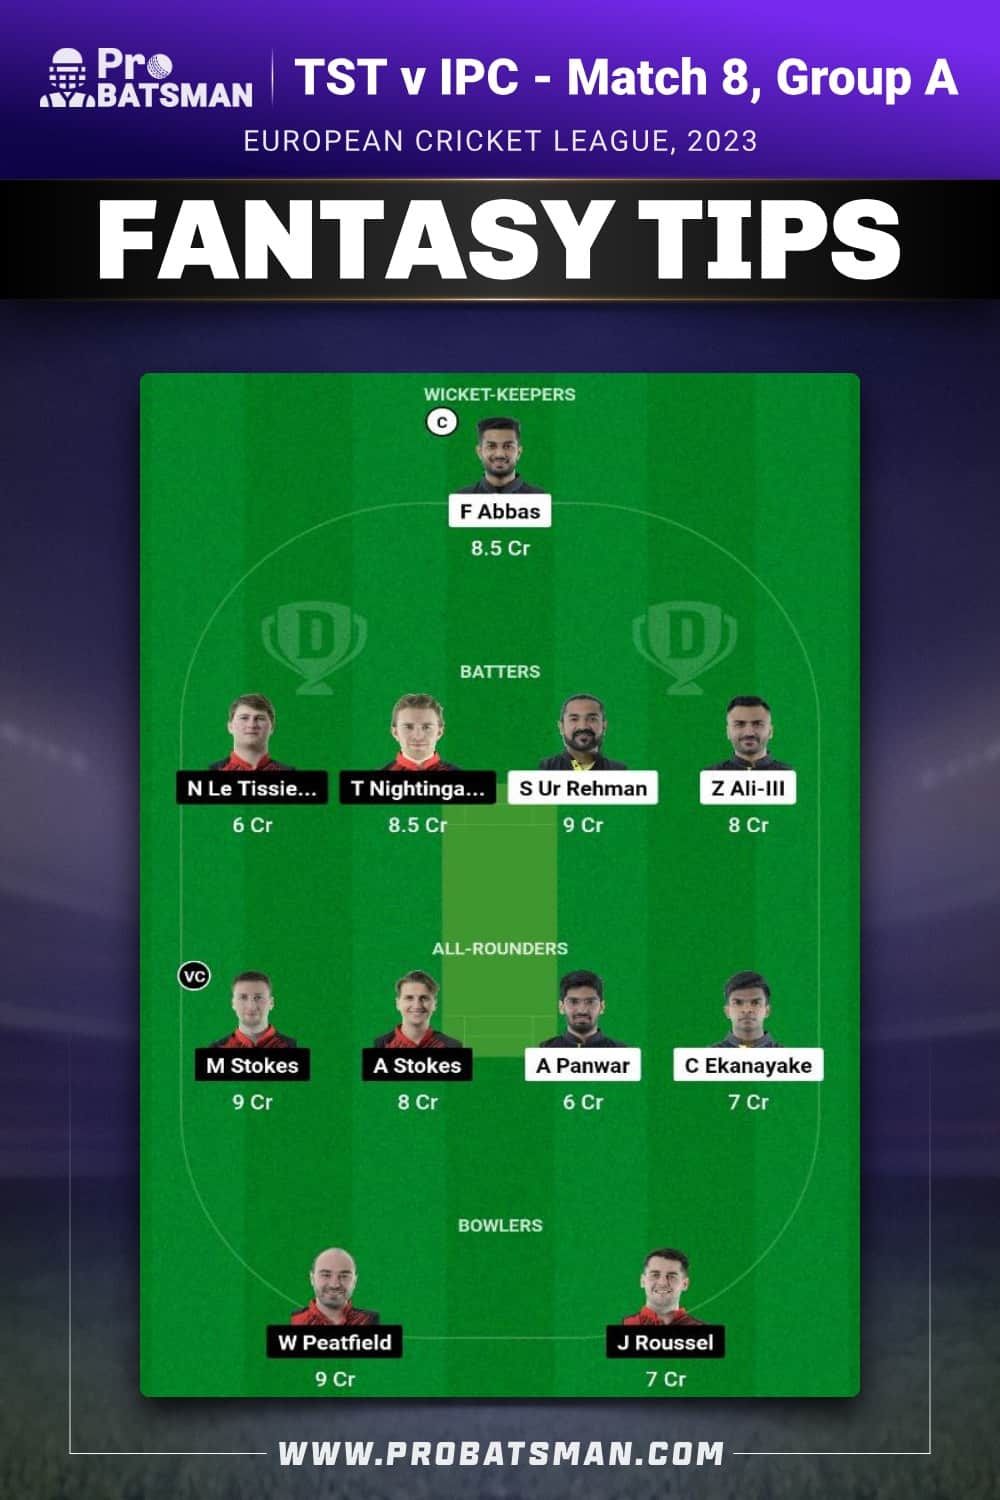 TST vs IPC Dream11 Prediction With Stats, Pitch Report & Player Record of European Cricket League, 2023 For Match 8 of Group A